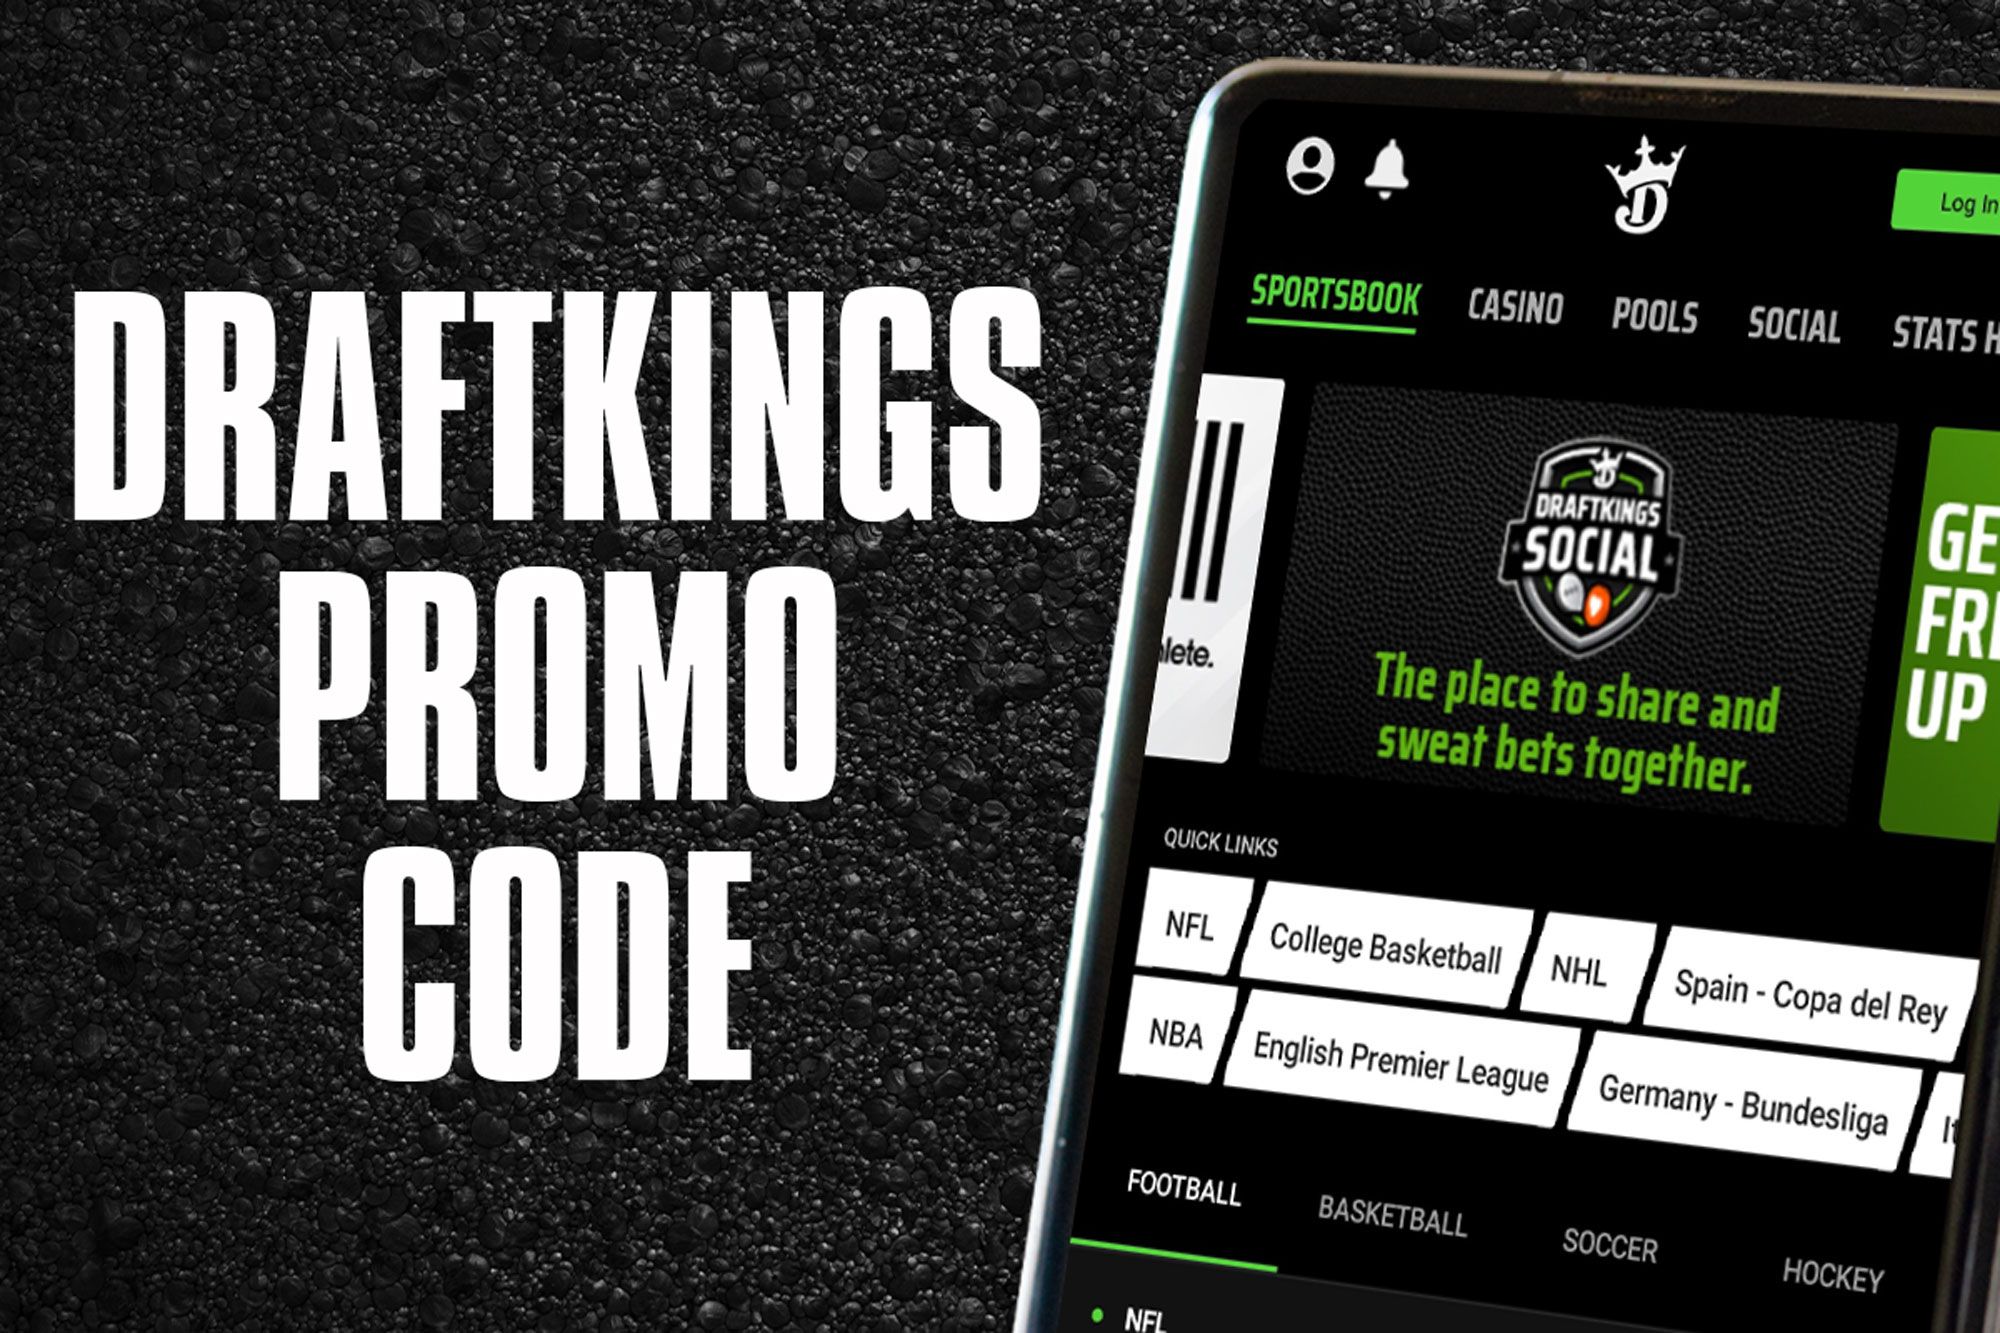 The DraftKings Promo Code for Best NFL Week 1 Odds Gives 40-1